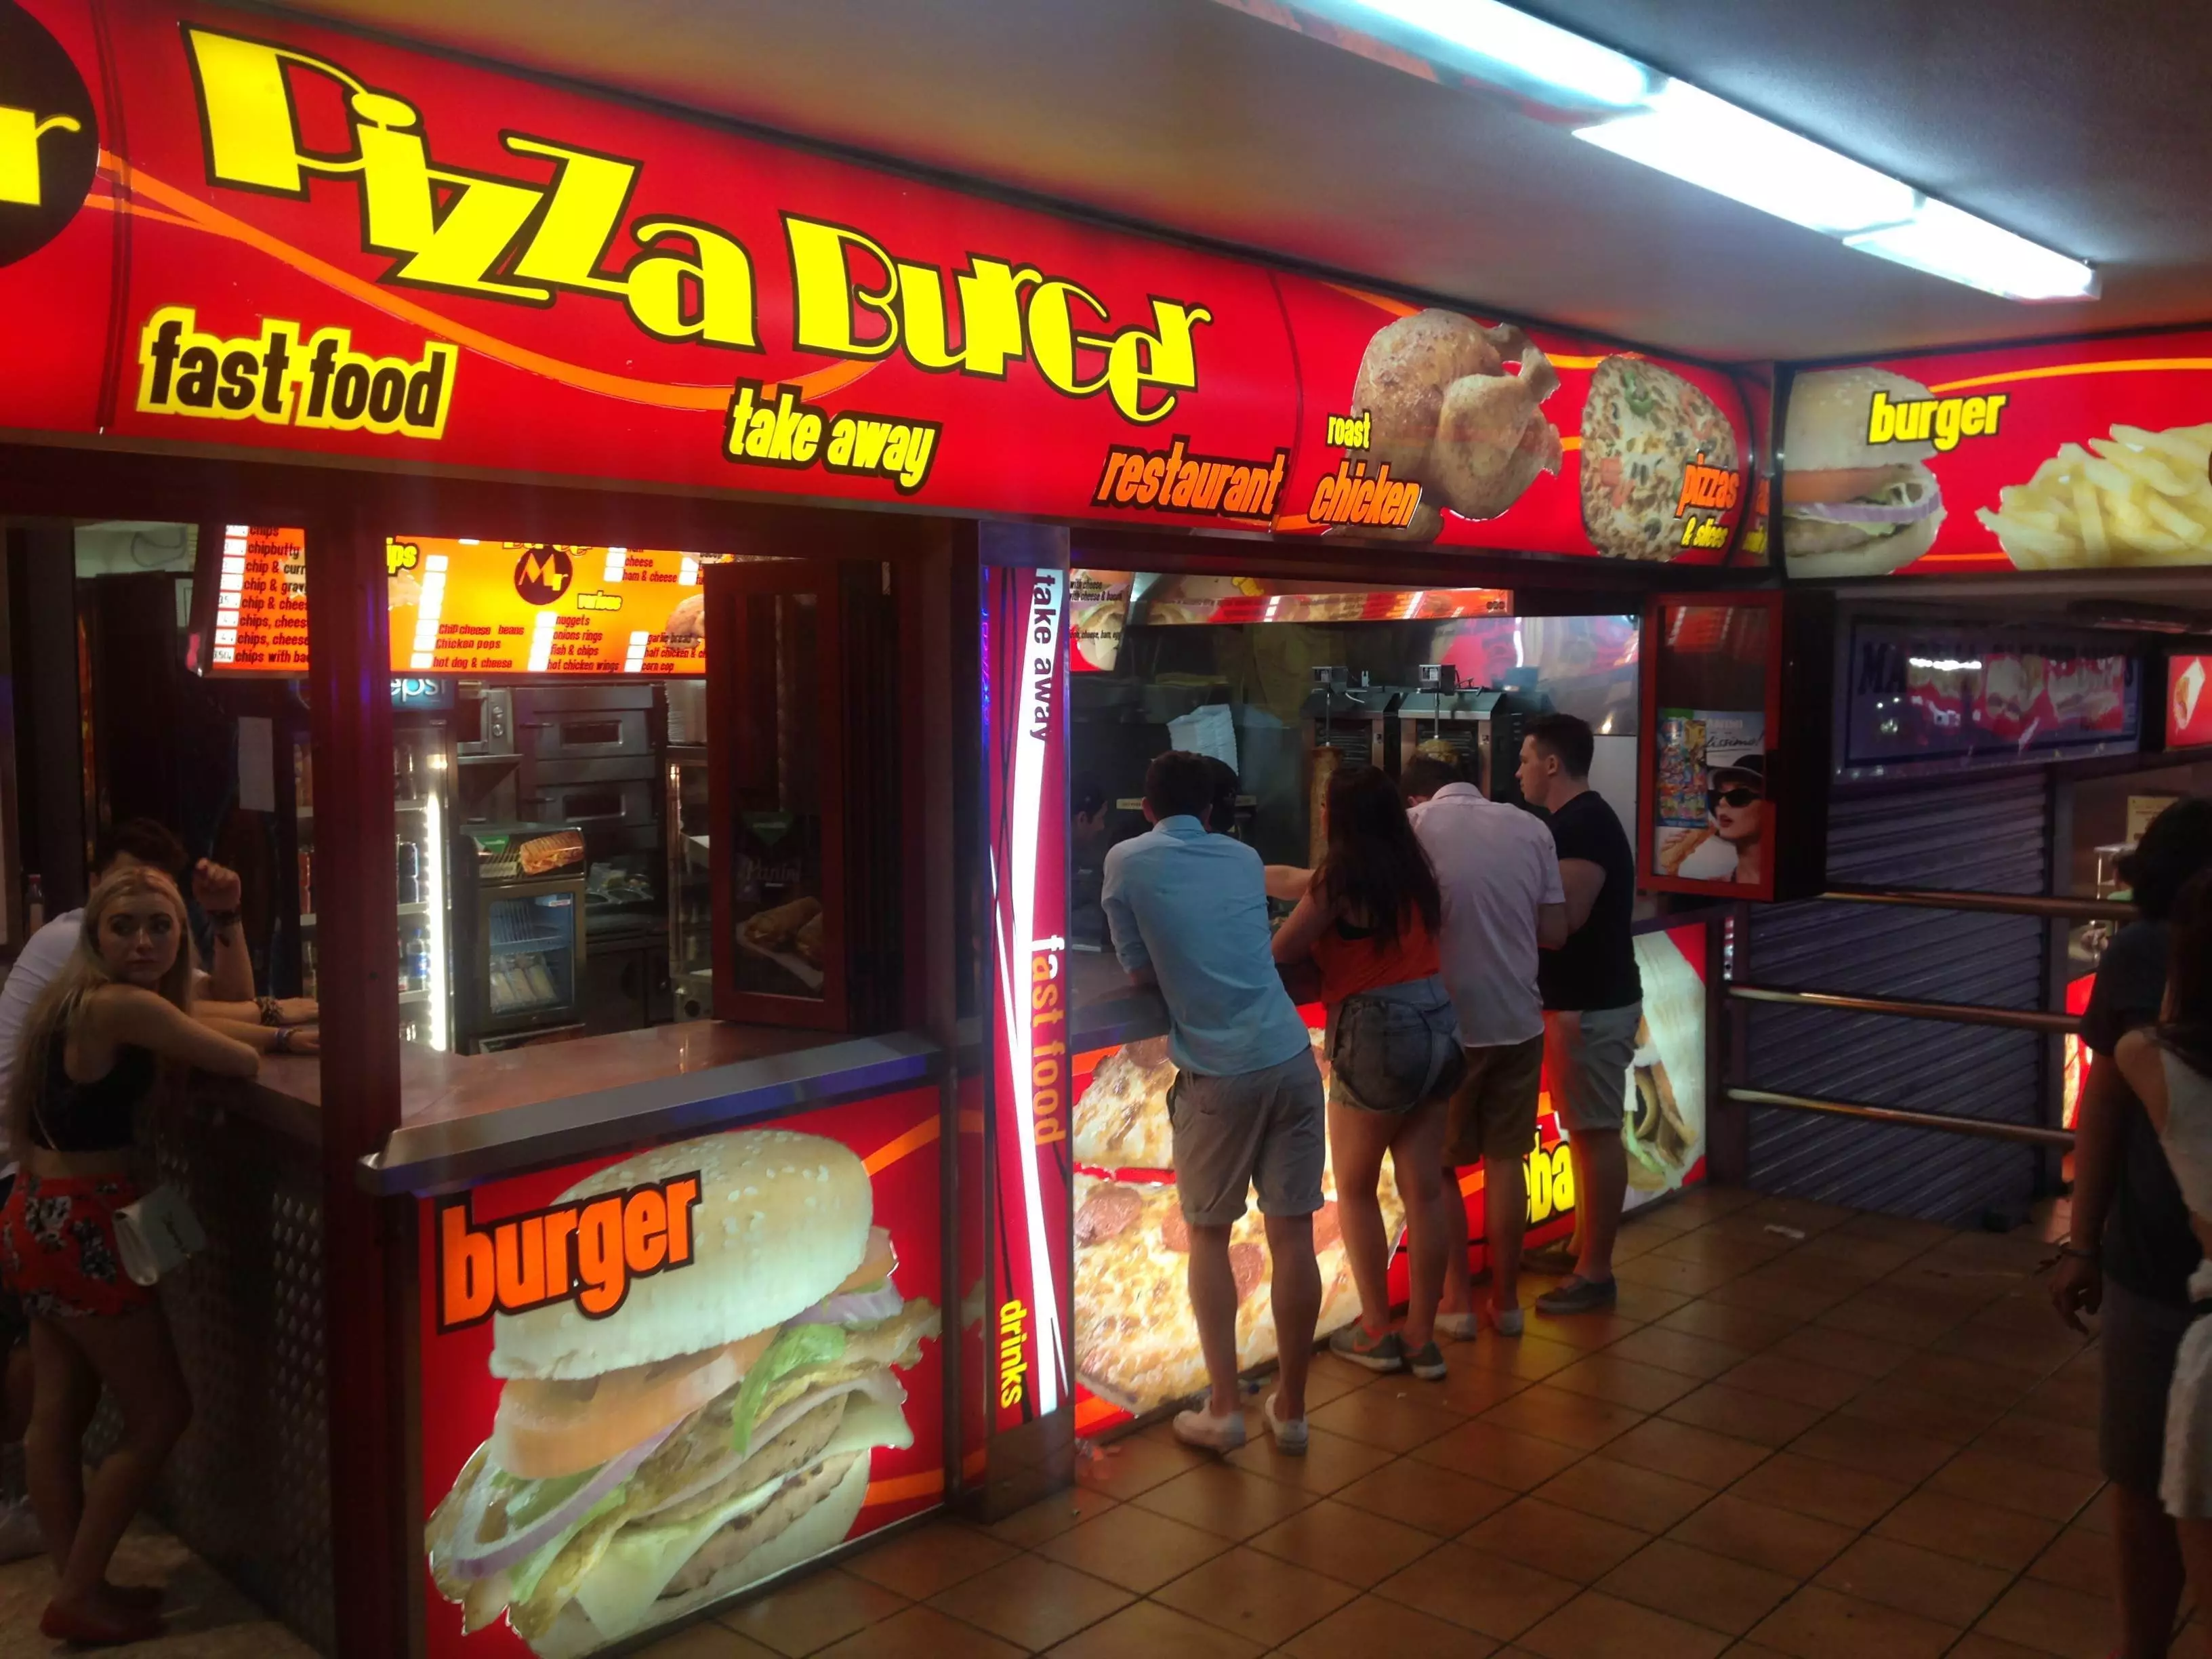 Pizza Burger in Magaluf